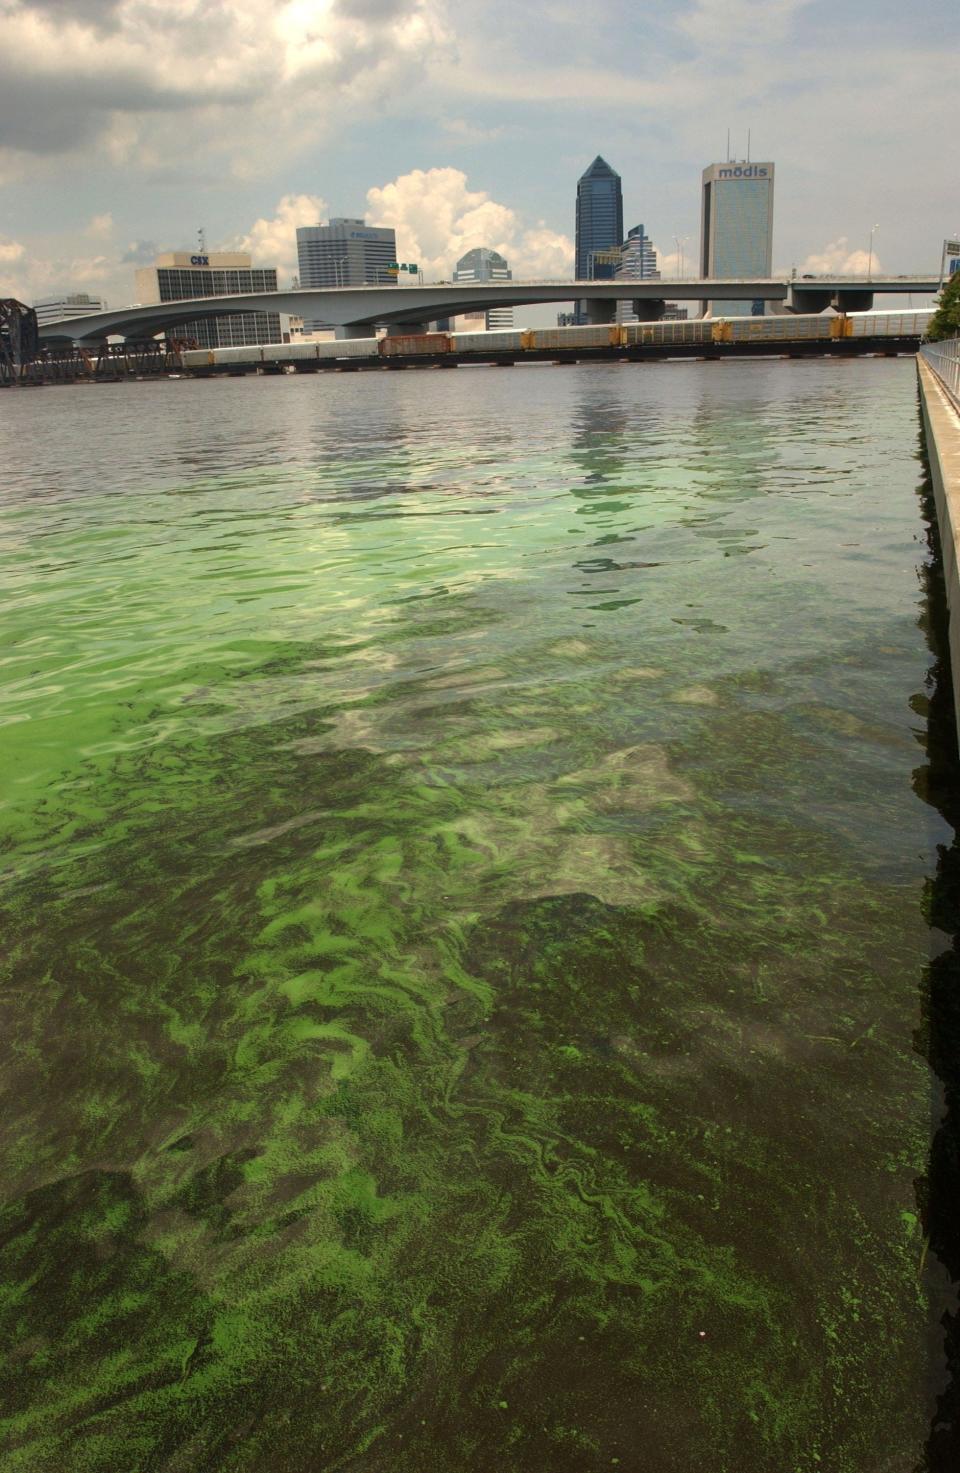 Algae covers the St. Johns River in this 2005 photo of downtown Jacksonville. Similar algae blooms, some containing toxins, have appeared repeatedly for many years. Warmer, saltier coastal waters will increase such events, UNF professor Cliff Ross said.